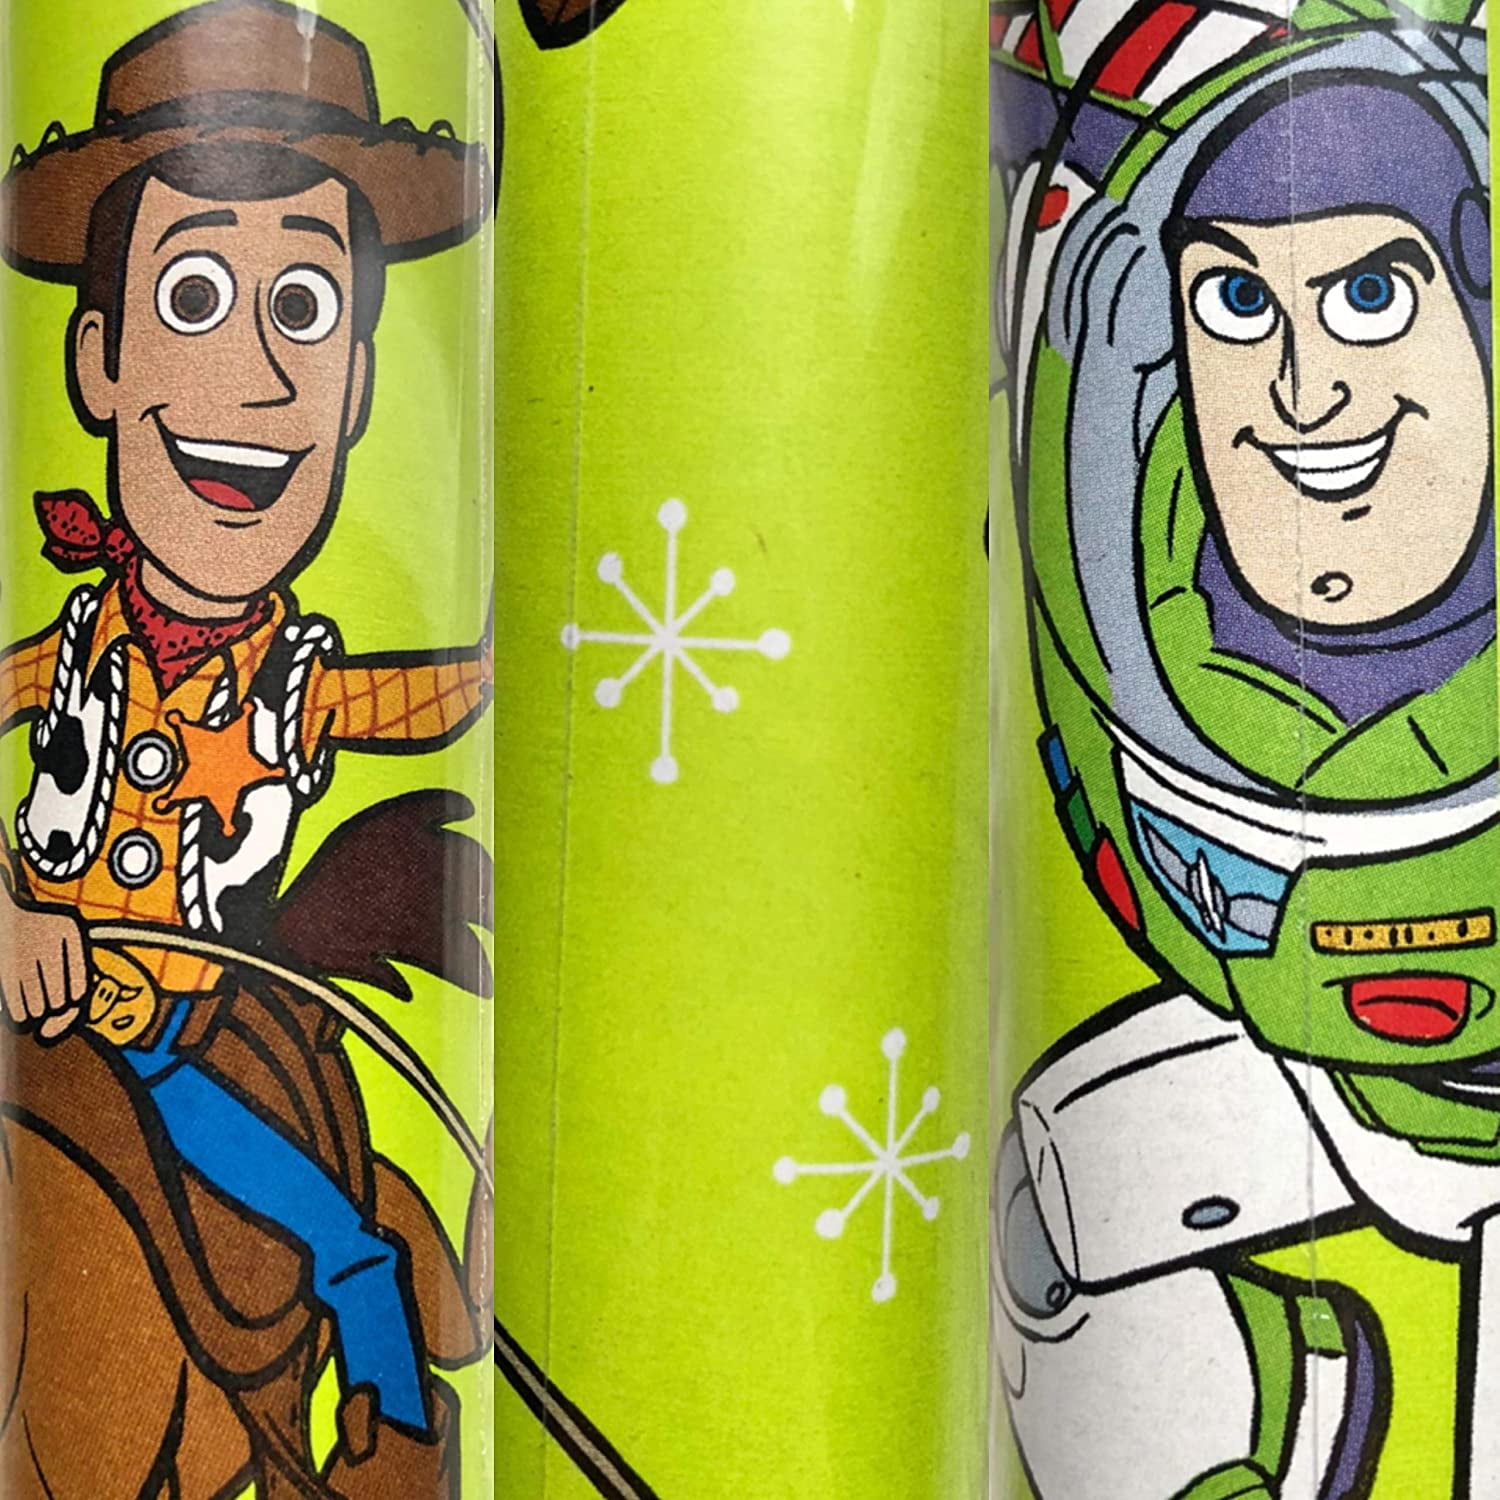 Details about   Disney Pixar Toy Story Christmas Gift Wrapping Paper 2 Rolls 20 Sq Ft Ea 